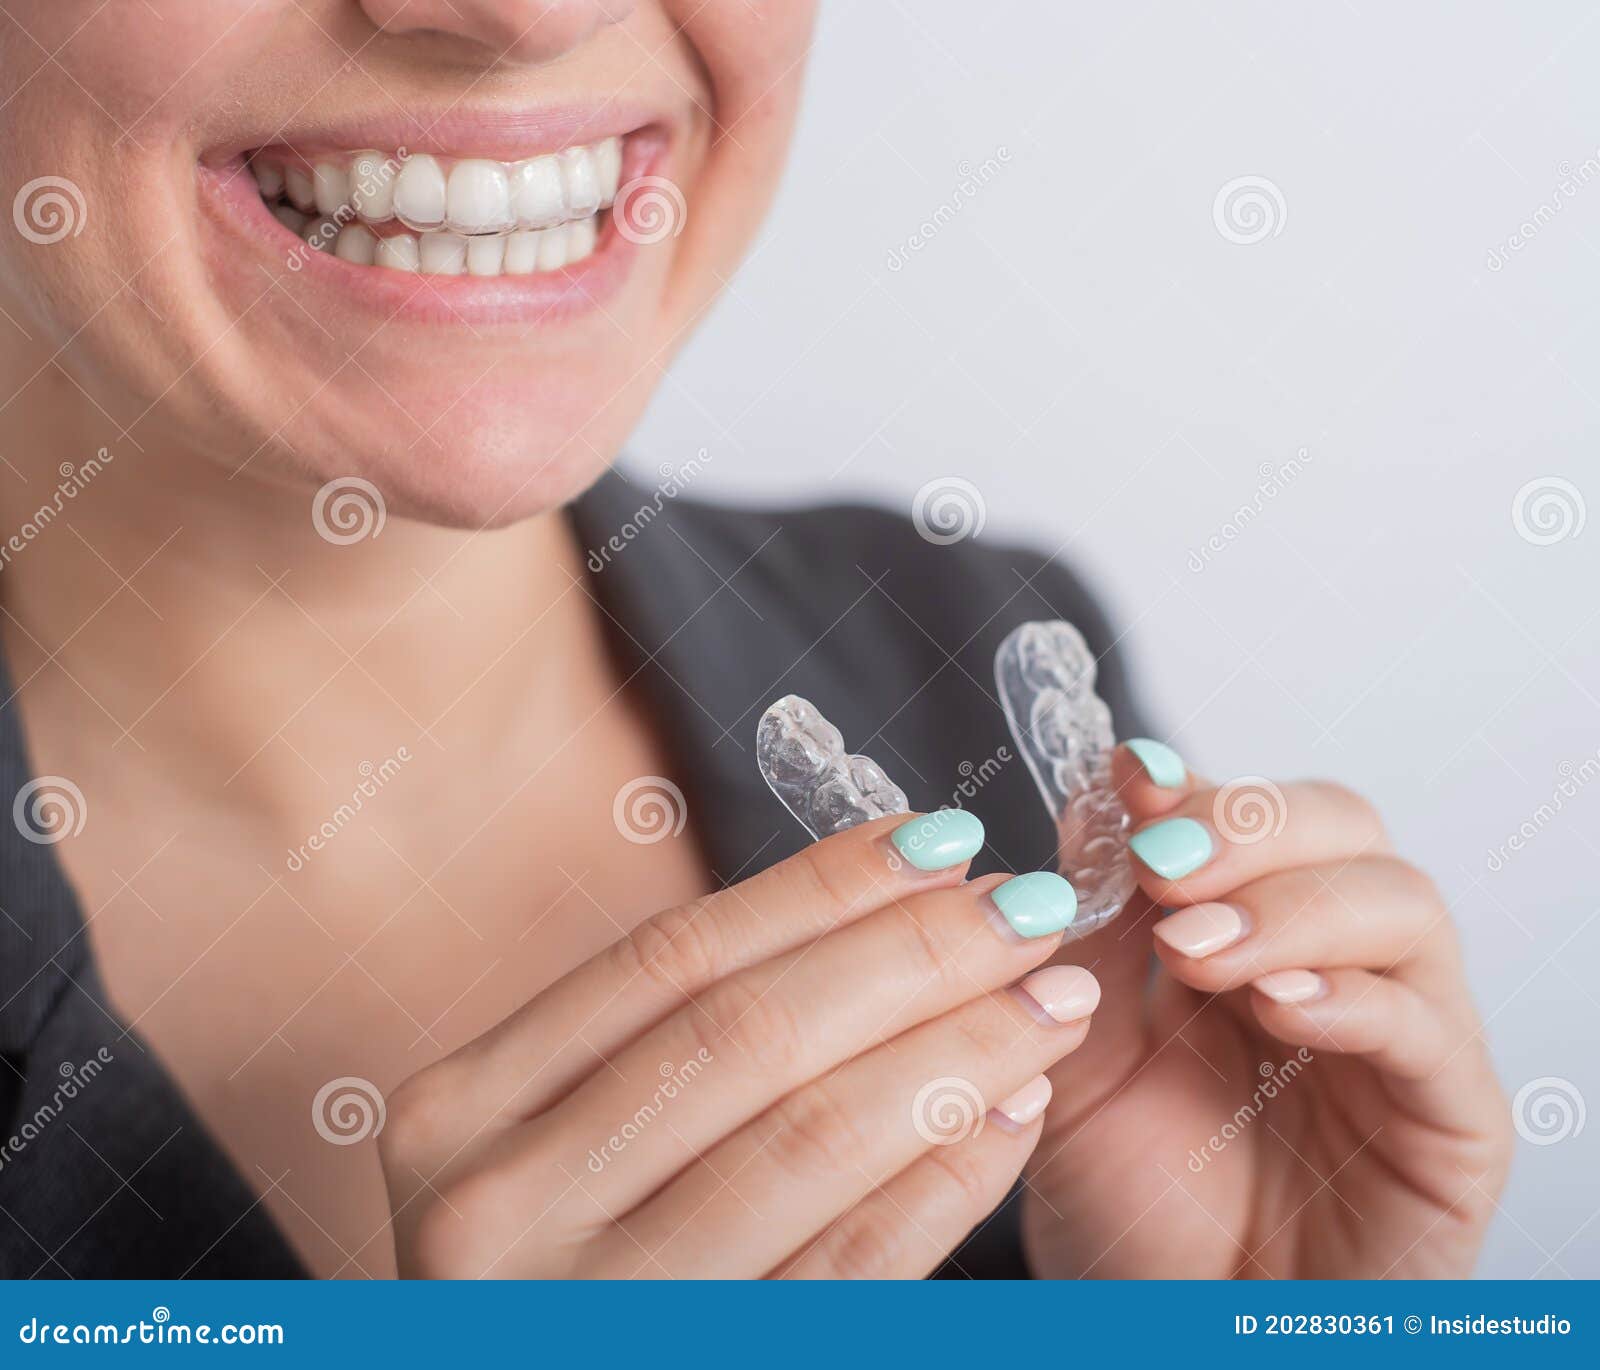 business woman puts on transparent retainers to straighten teeth